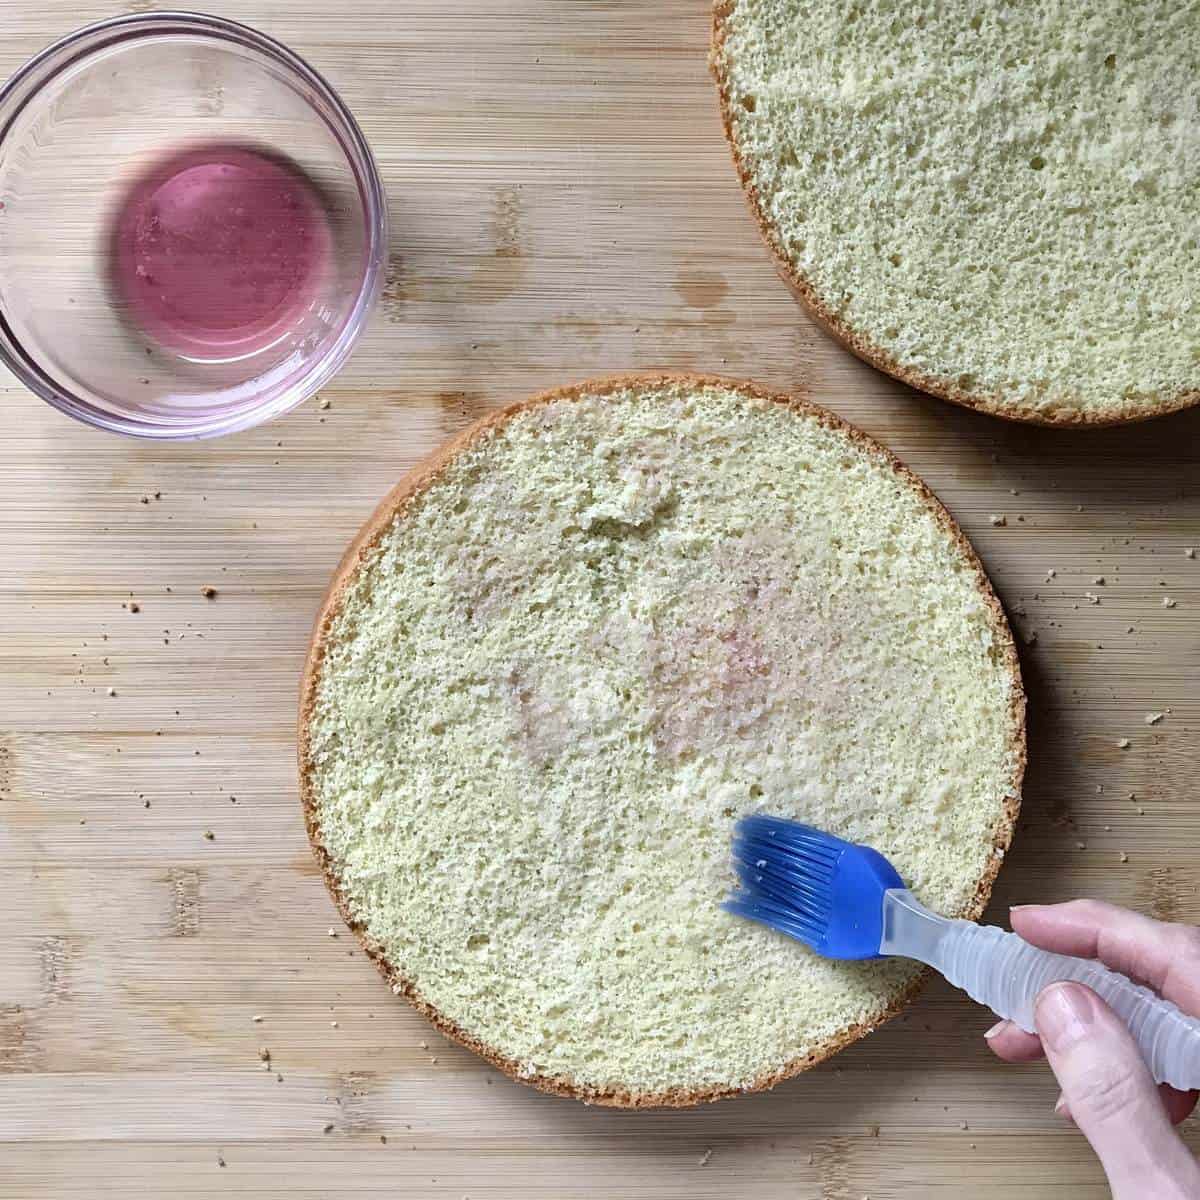 Alcohol being brushed on a sponge cake. 